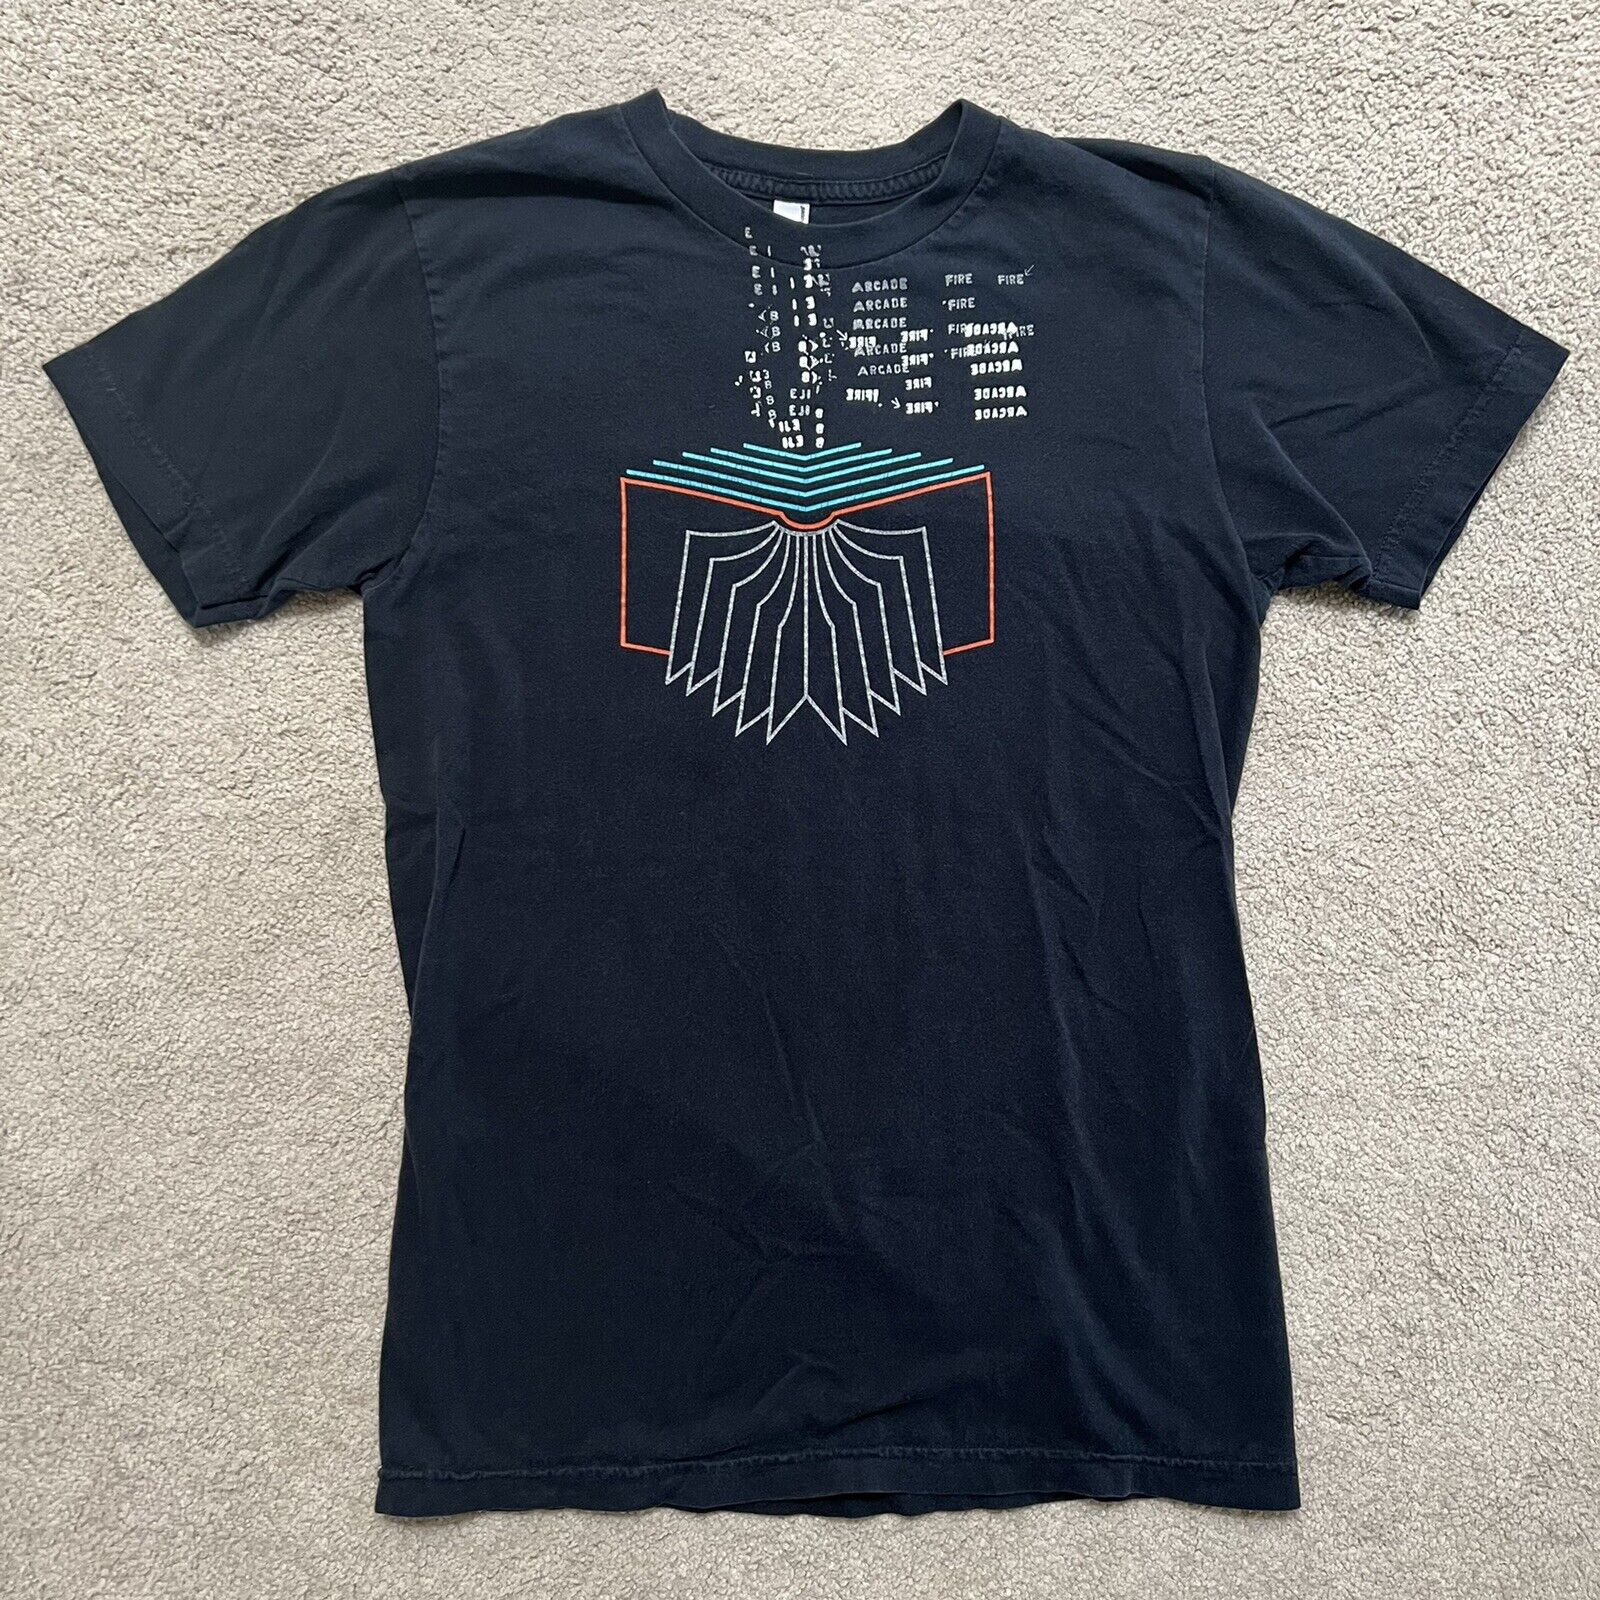 Arcade Fire Neon Bible Shirt 2007 Original Vintage Rare Used Size Adult Small